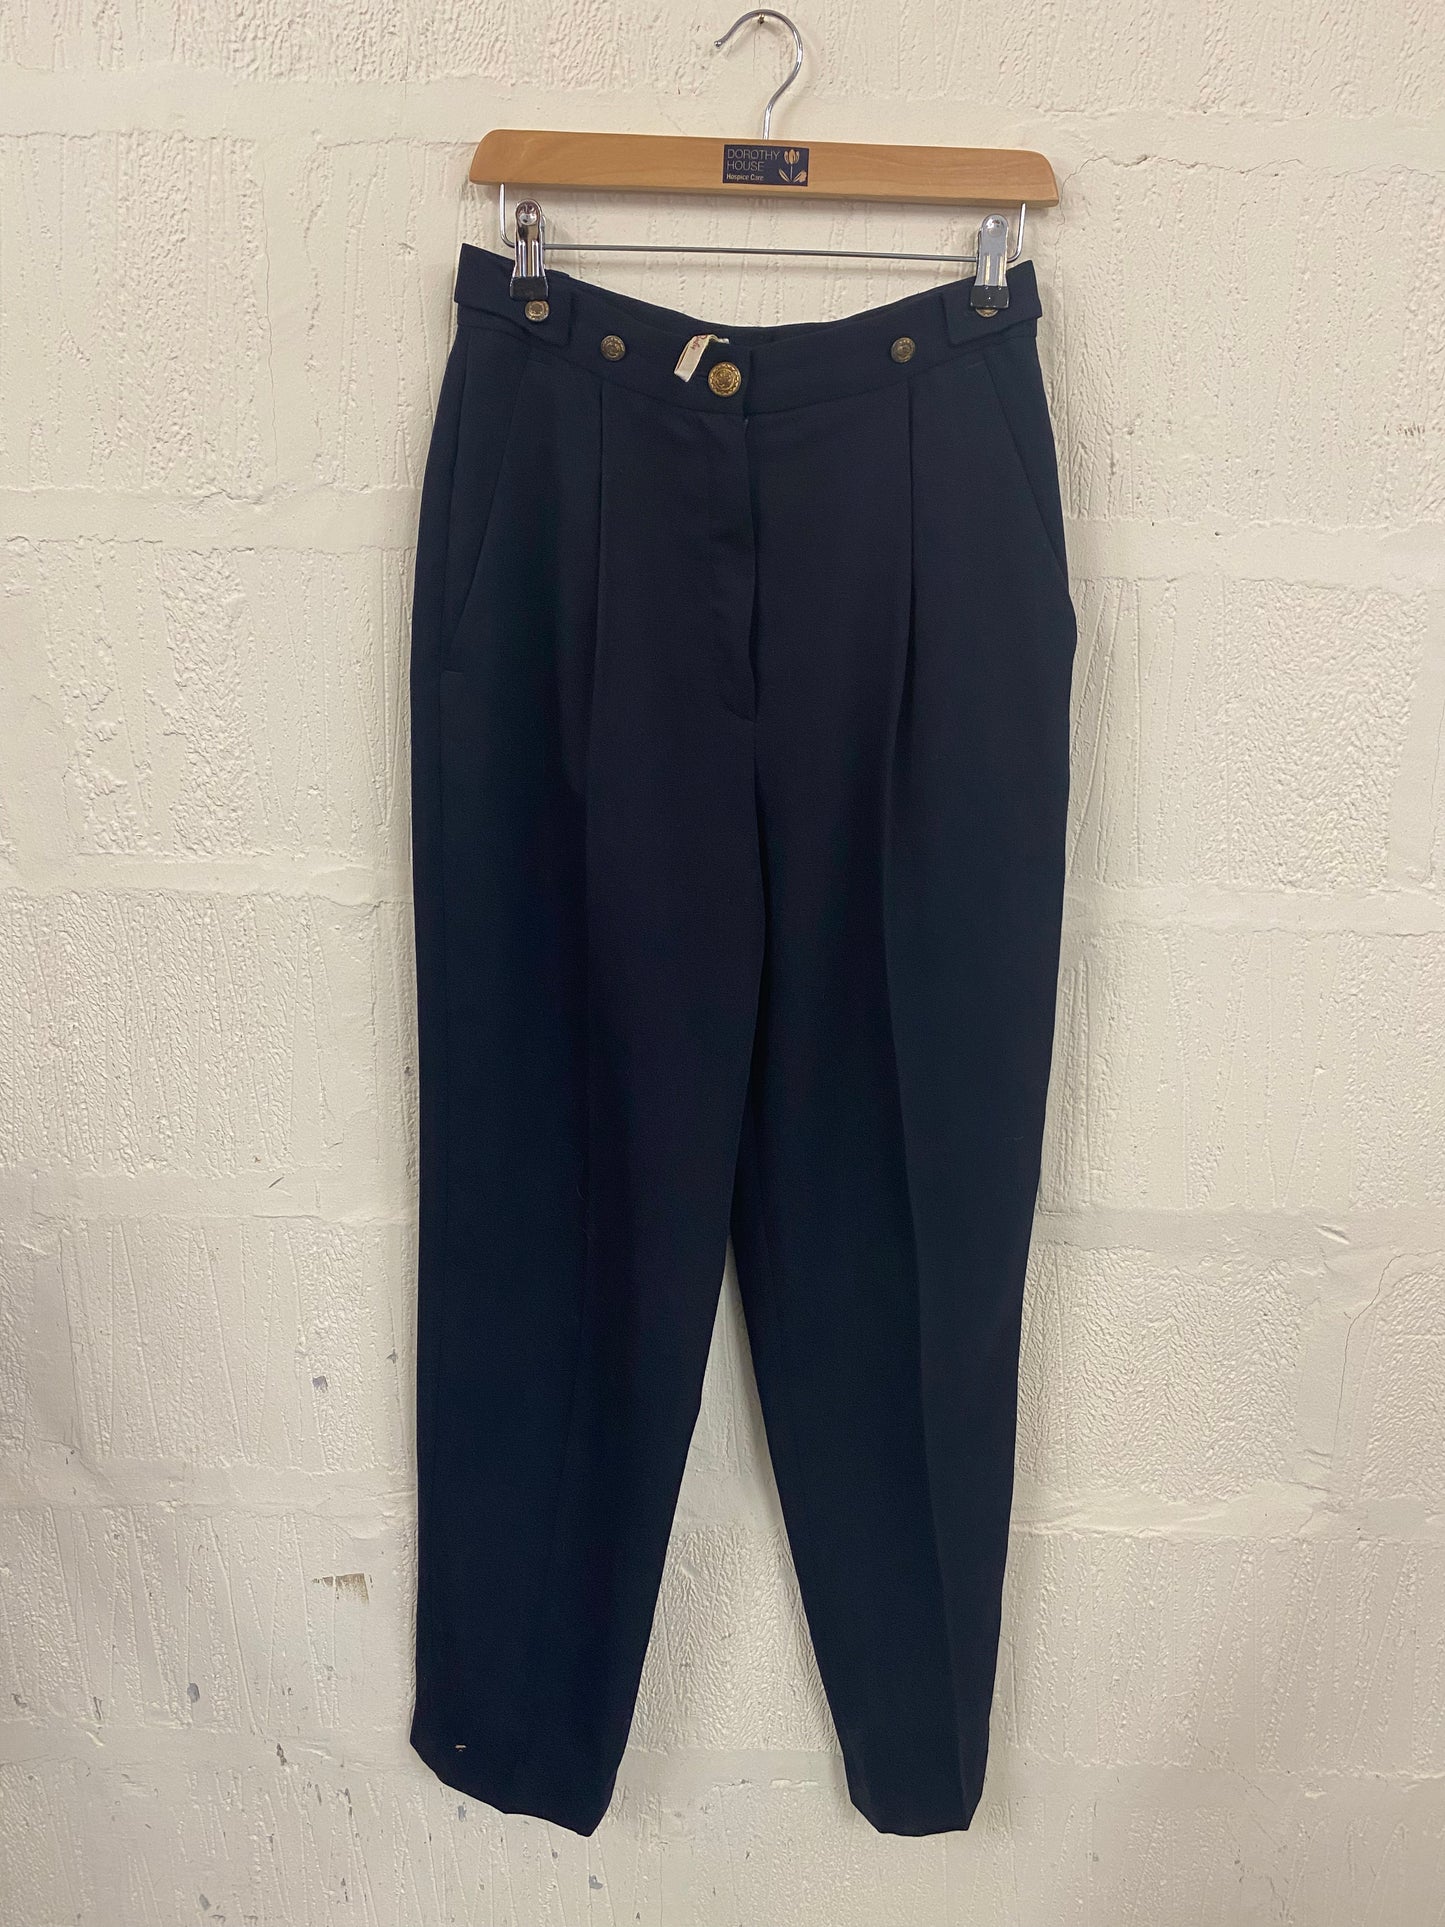 Vintage Nautical Tapered Leg Trouser Size 10